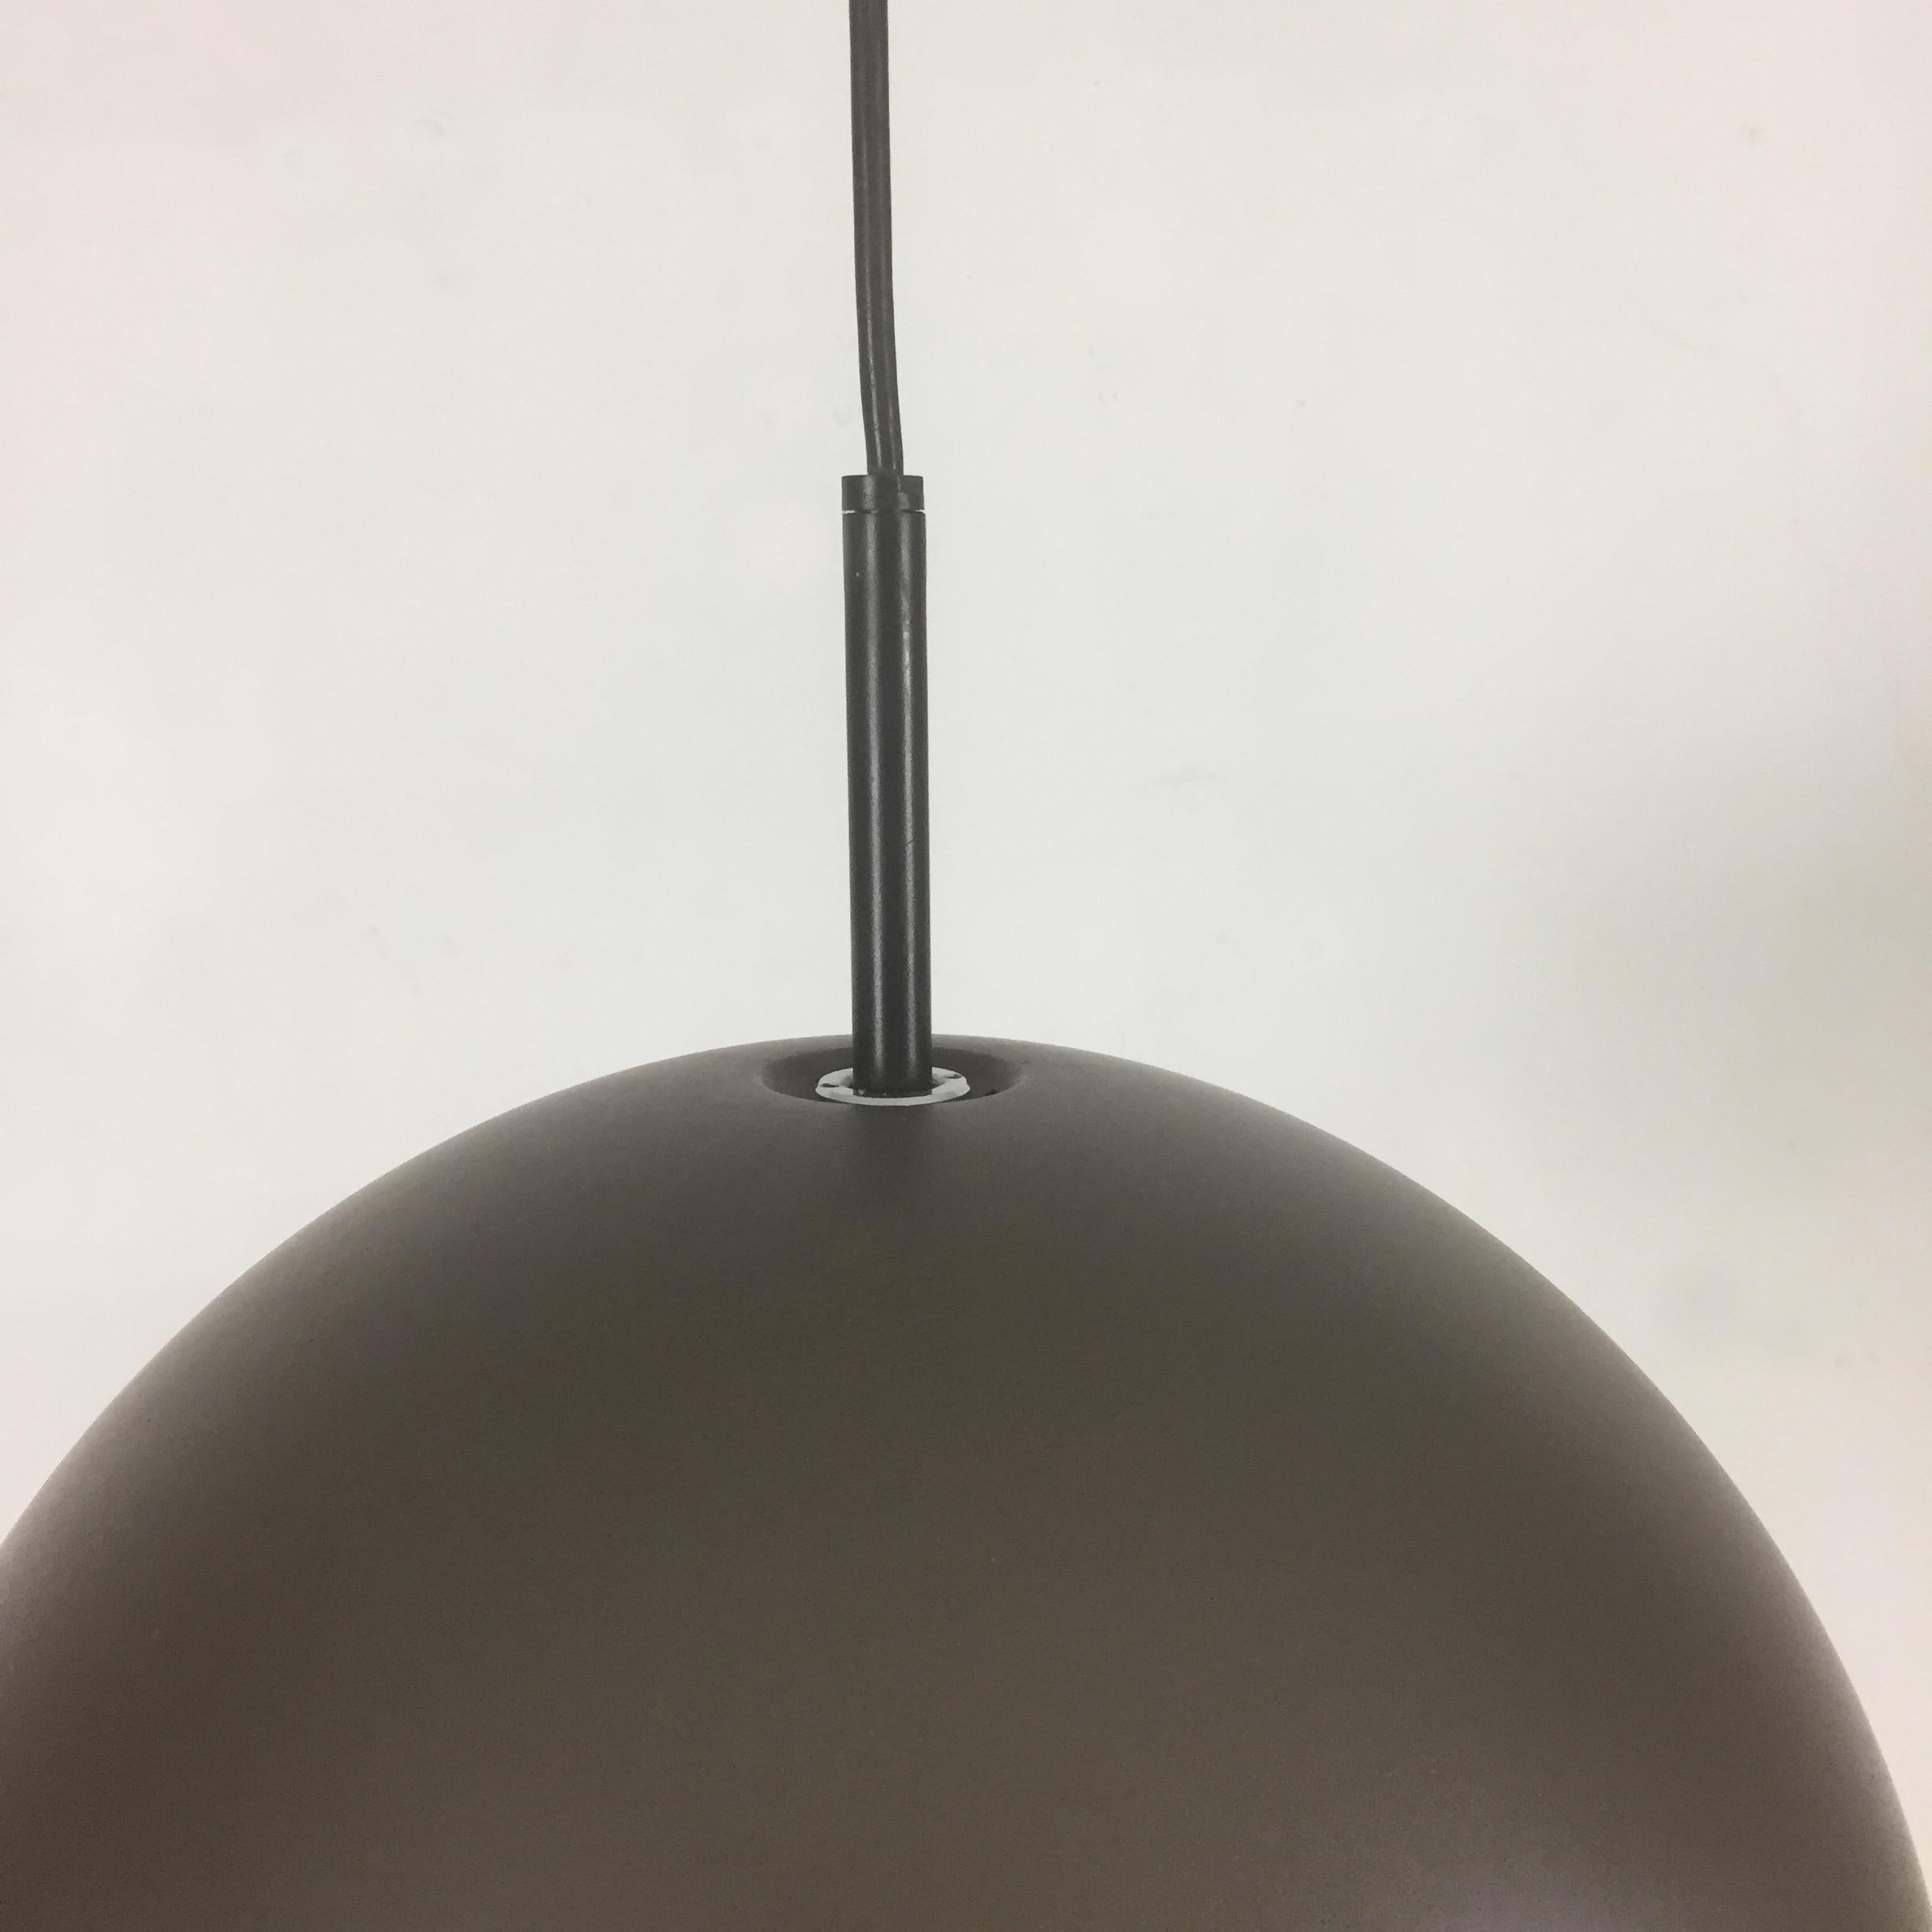 1970s Brown Metal Bubble Hanging Light by Rolf Krüger for Staff Lights, Germany 1